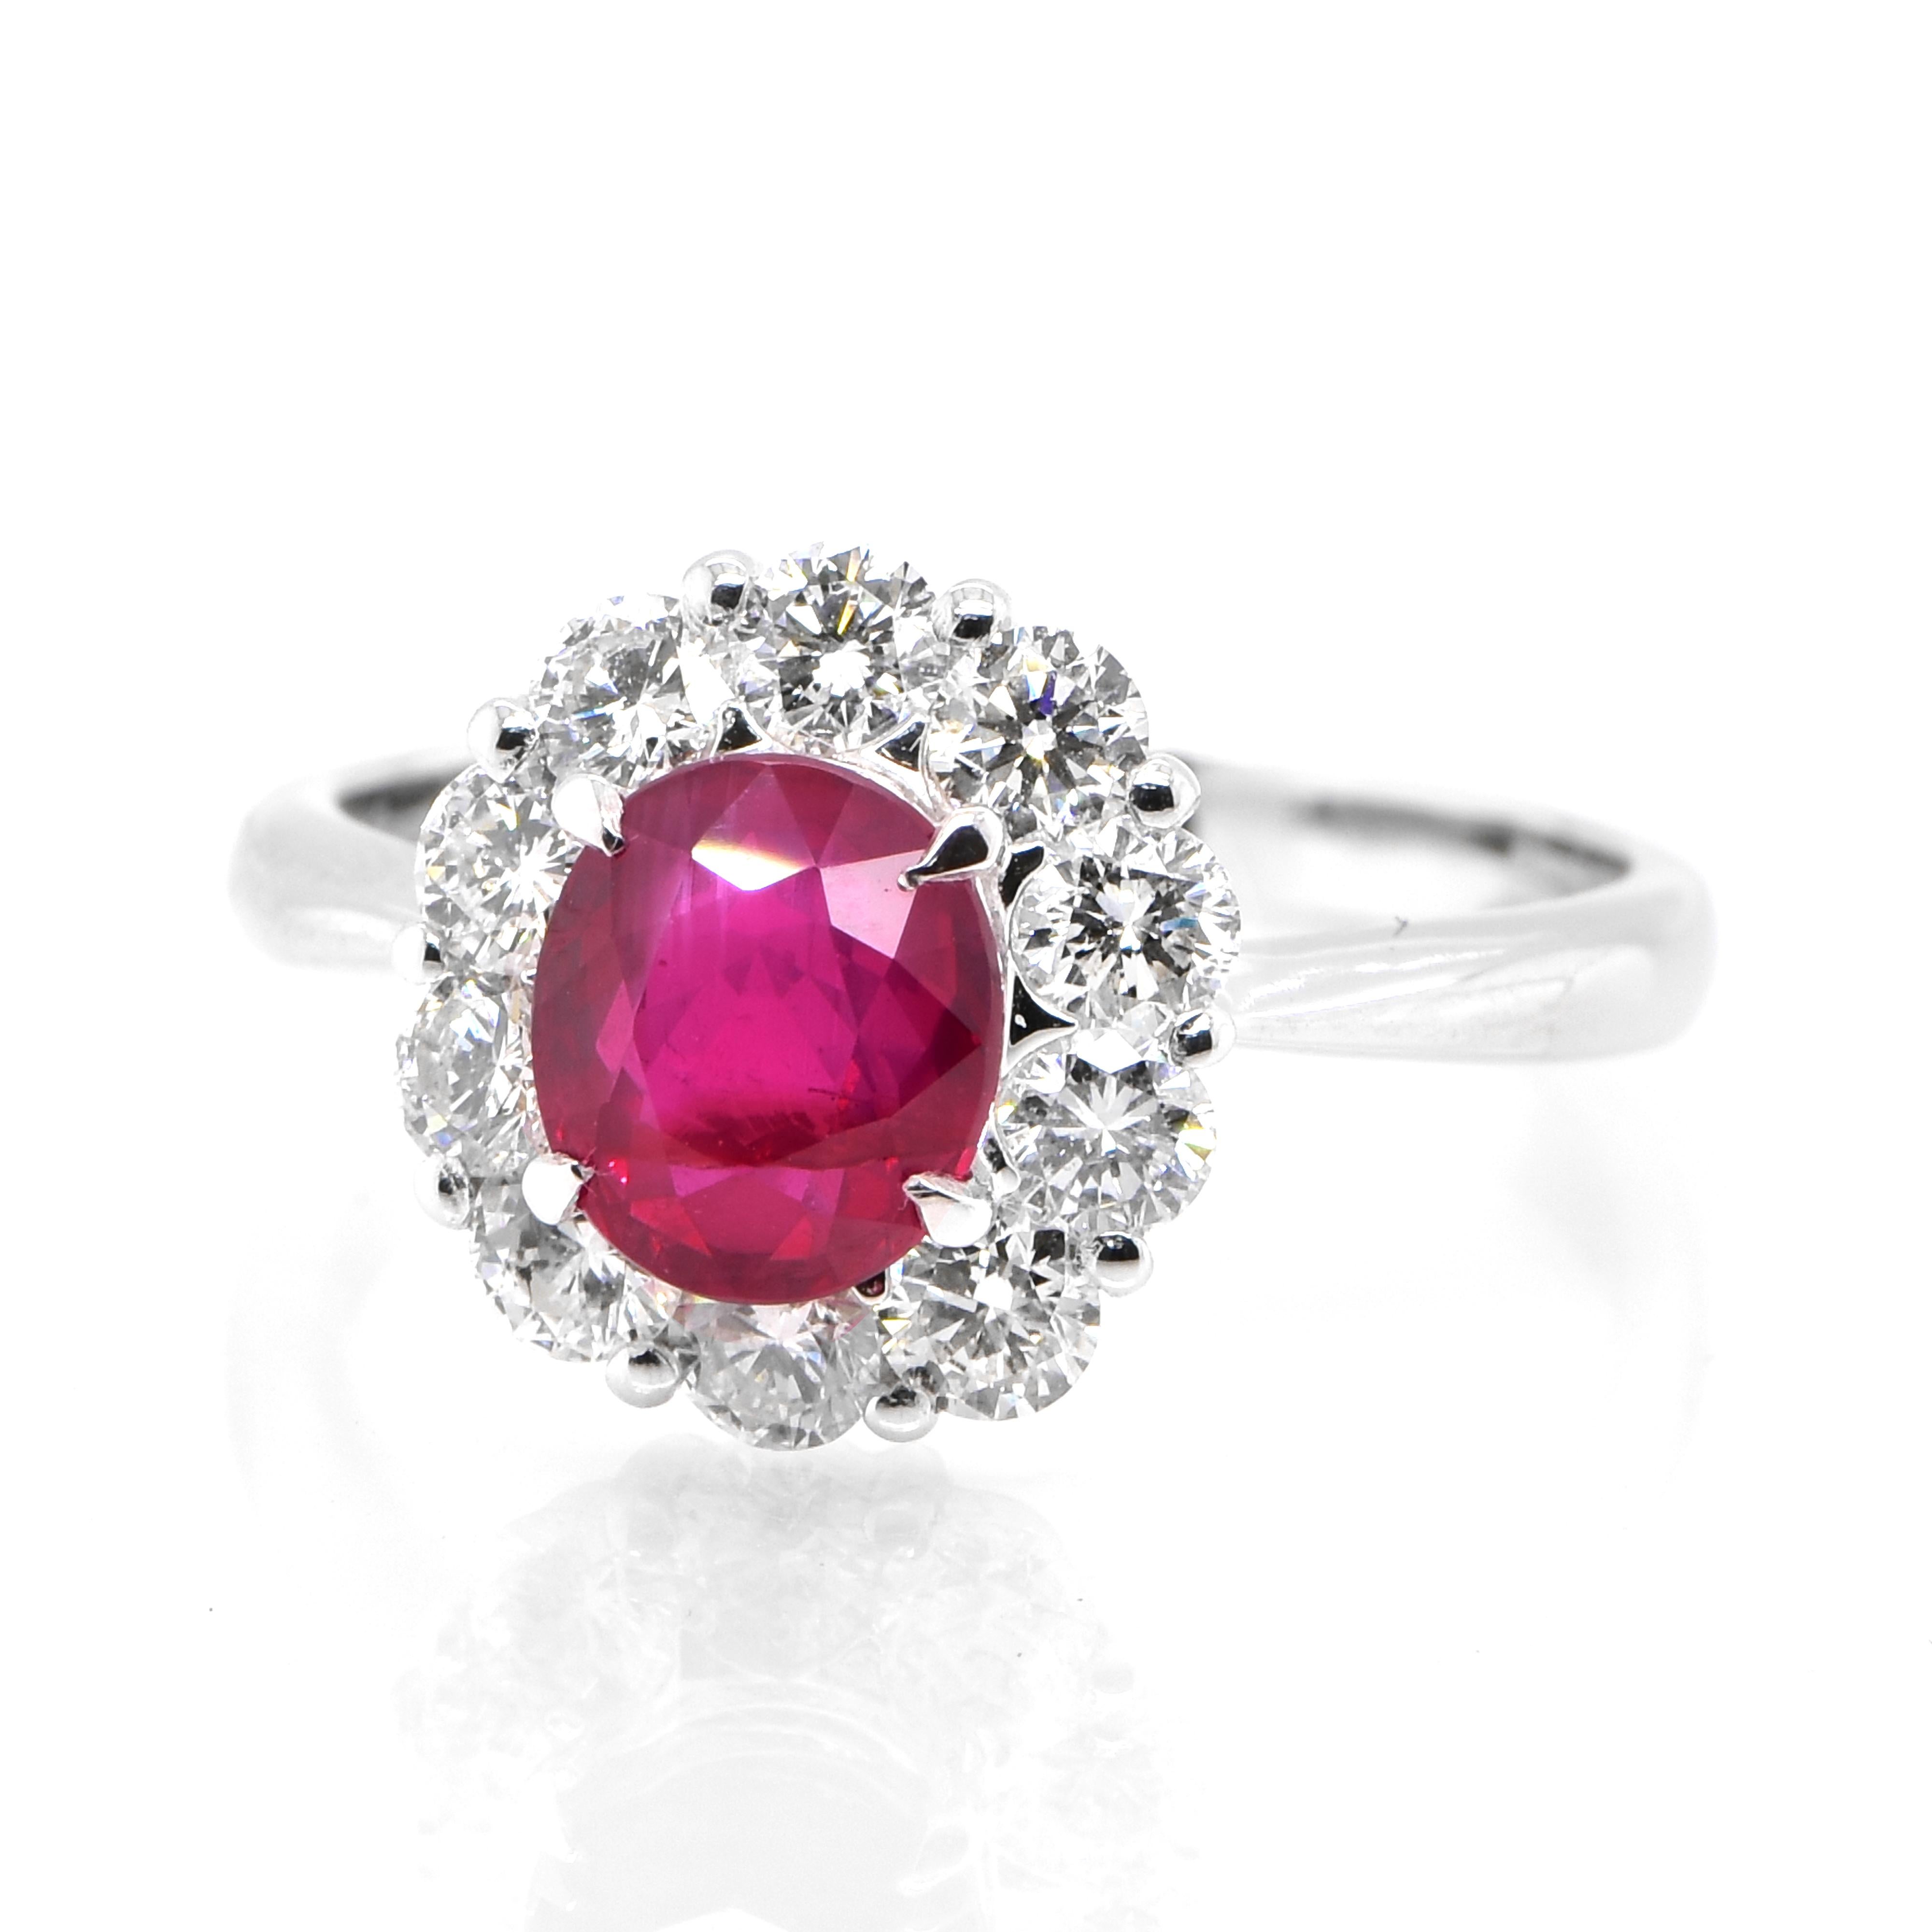 A beautiful Ring set in Platinum featuring a AIGS Certified 1.39 Carat Natural, Untreated (No Heat), Pigeon Blood Ruby and 0.80 Carat Diamonds. Rubies are referred to as 